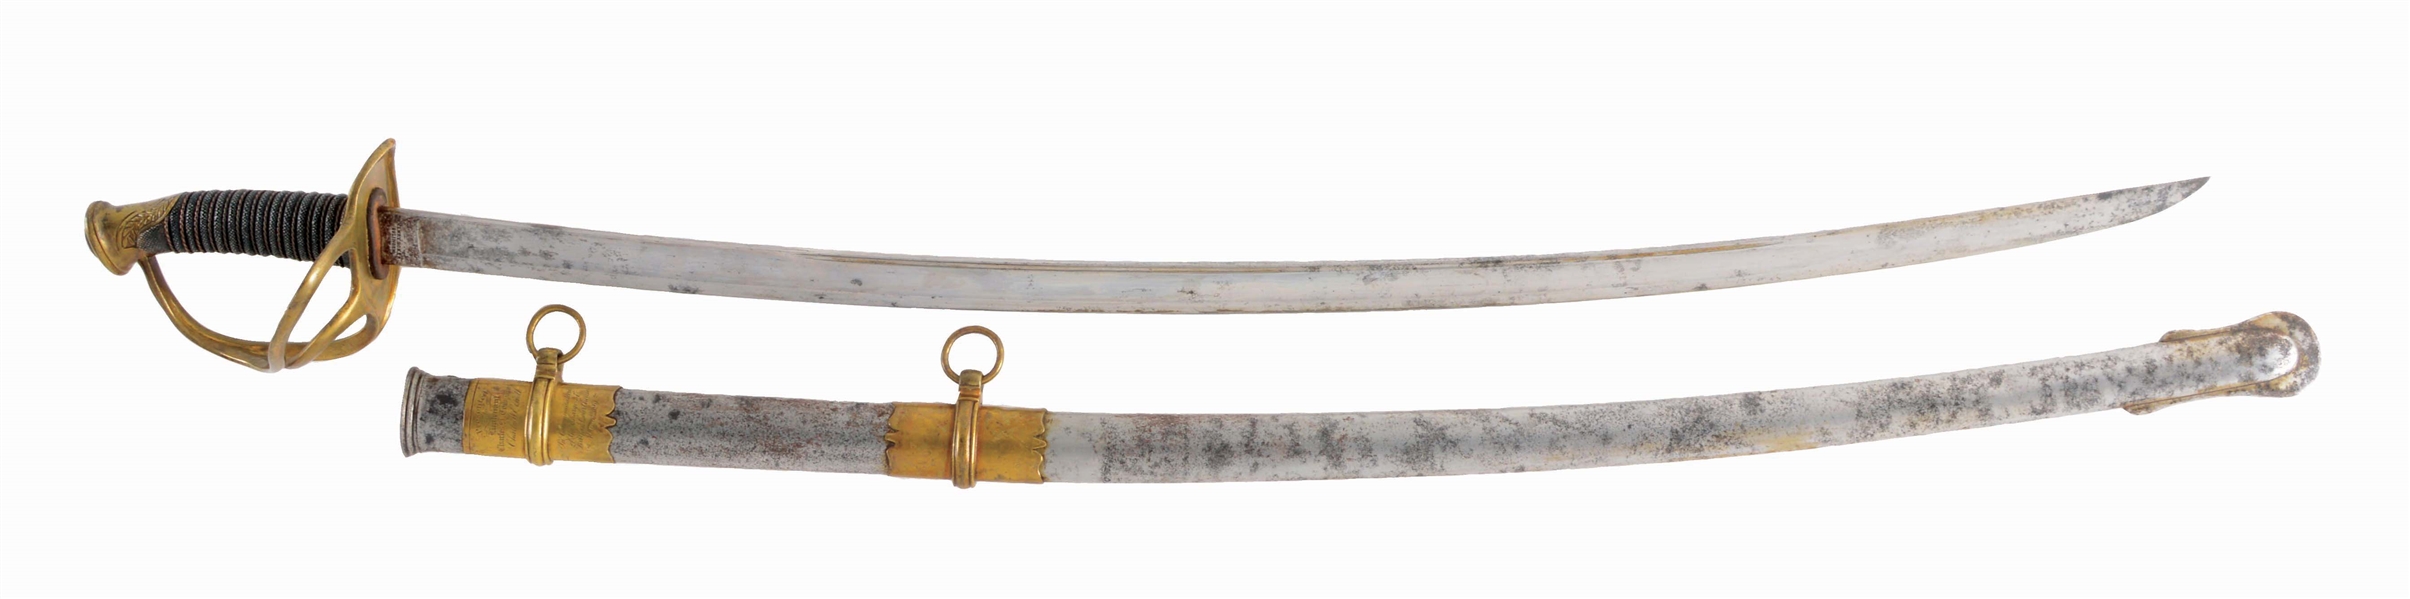 MODEL 1840 SABER PRESENTED TO MEDAL OF HONOR RECIPIENT LIEUTENANT CHARLES H. TOMPKINS.